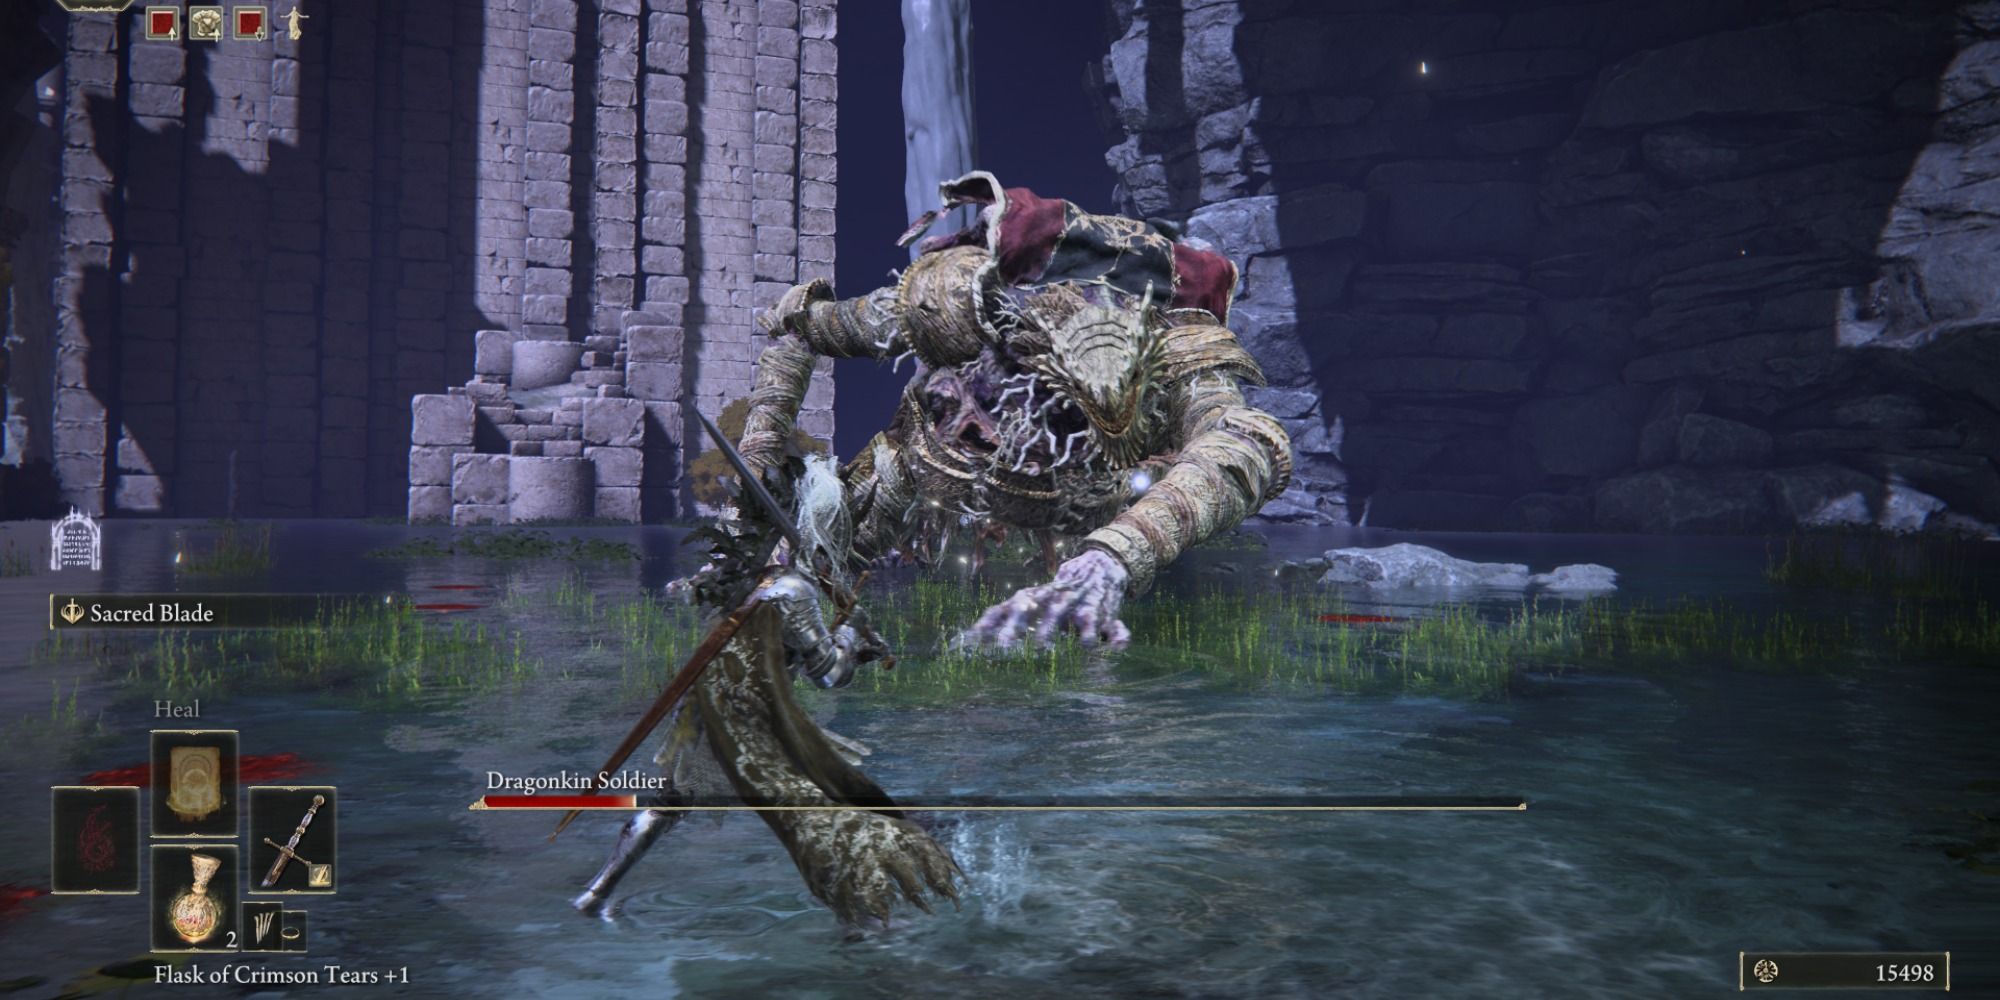 The player character squaring off against the Dragonkin Soldier in Elden Ring